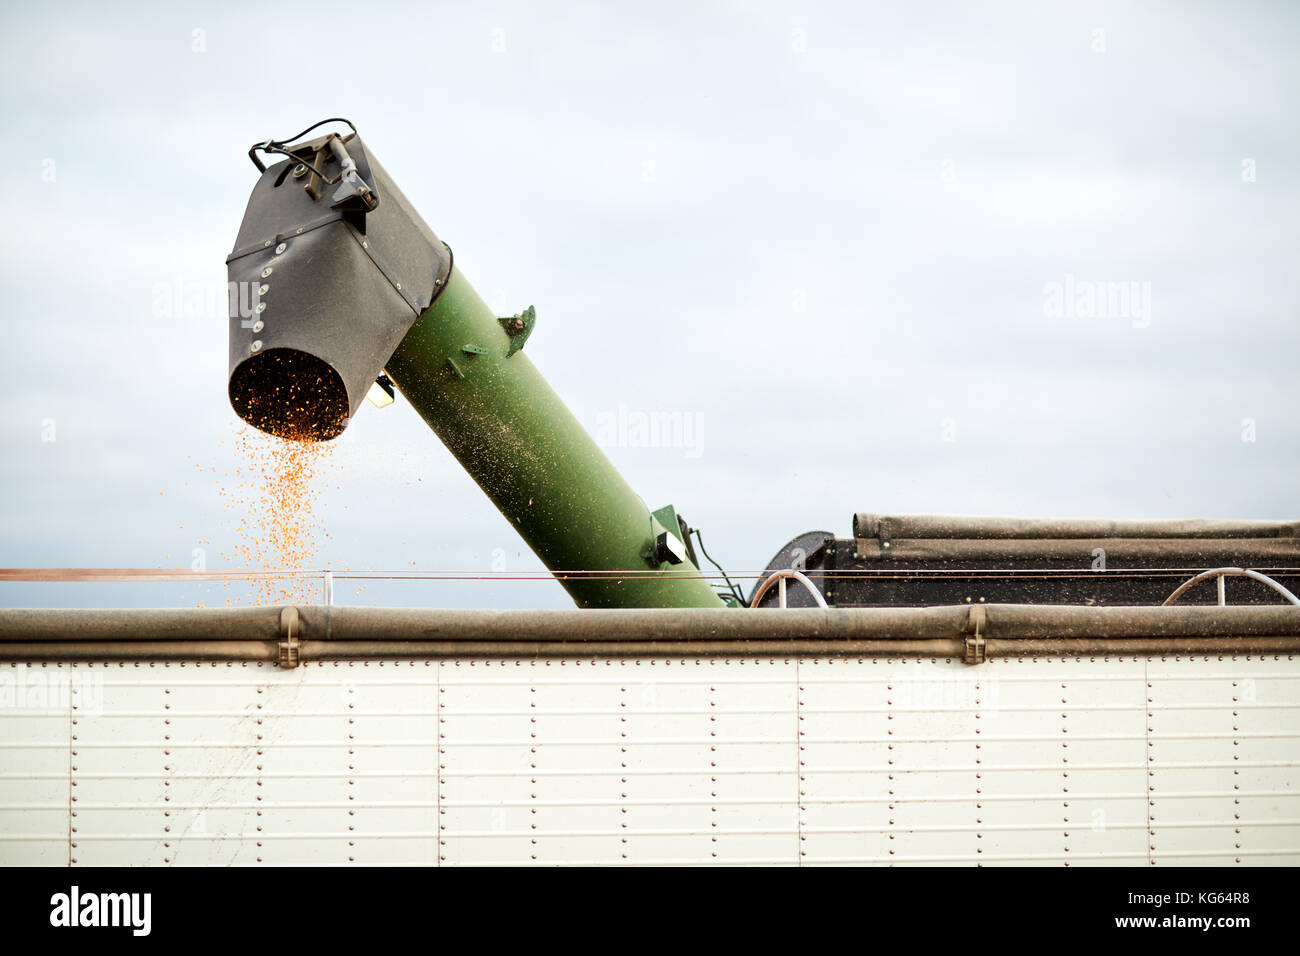 Trickle of corn kernels from a combine harvester emptying into a farm trailer or truck during harvesting of the crop Stock Photo